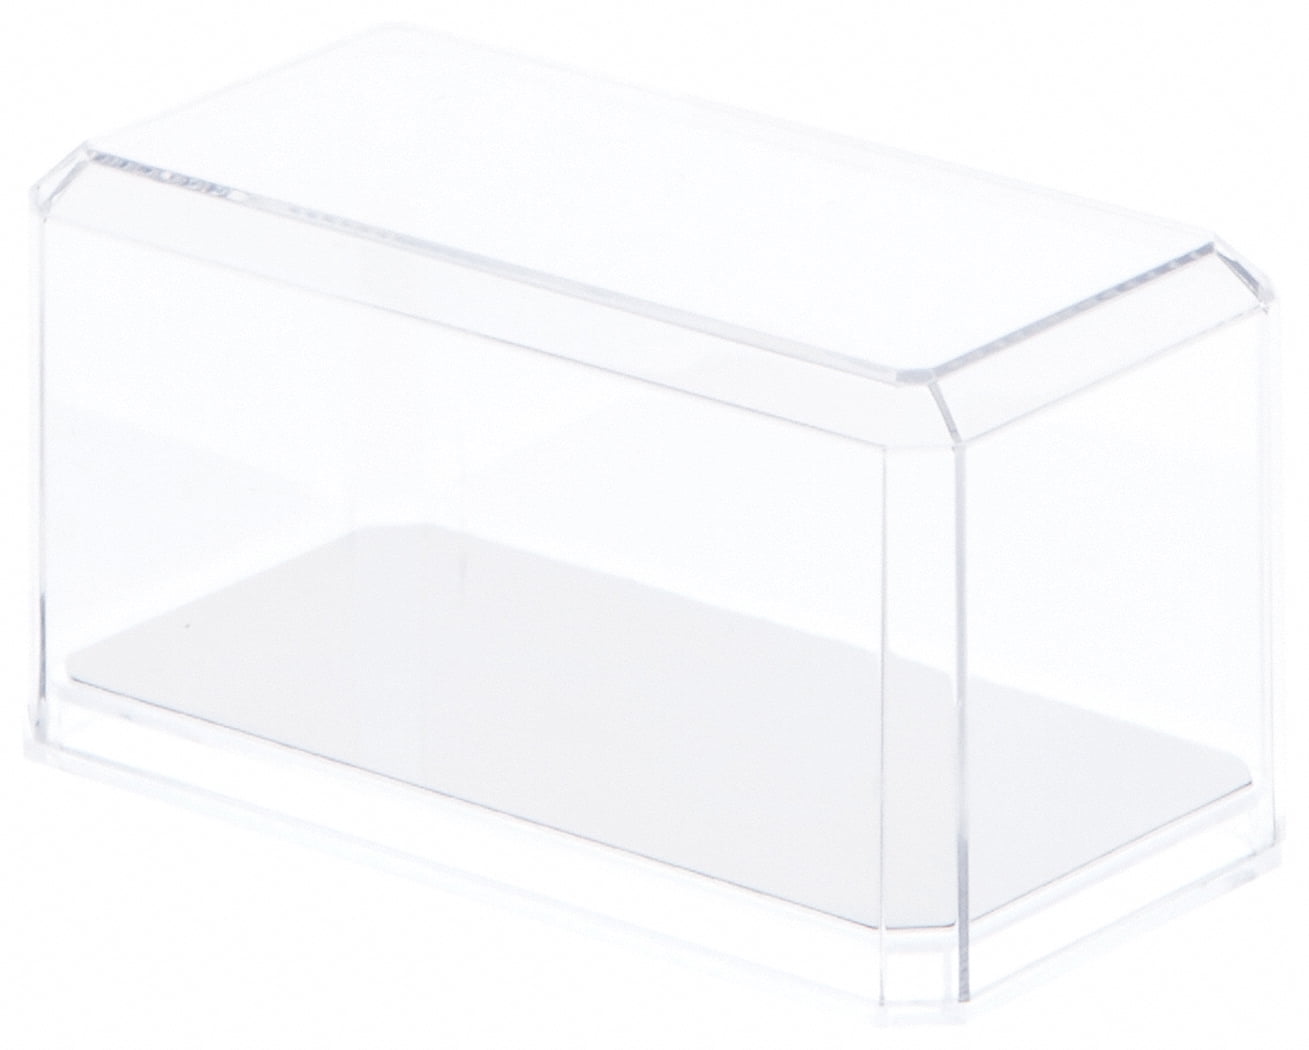 9 x 4.375 x 4.125 12 Clear Acrylic Display Cases For 1:24 Scale Cars 